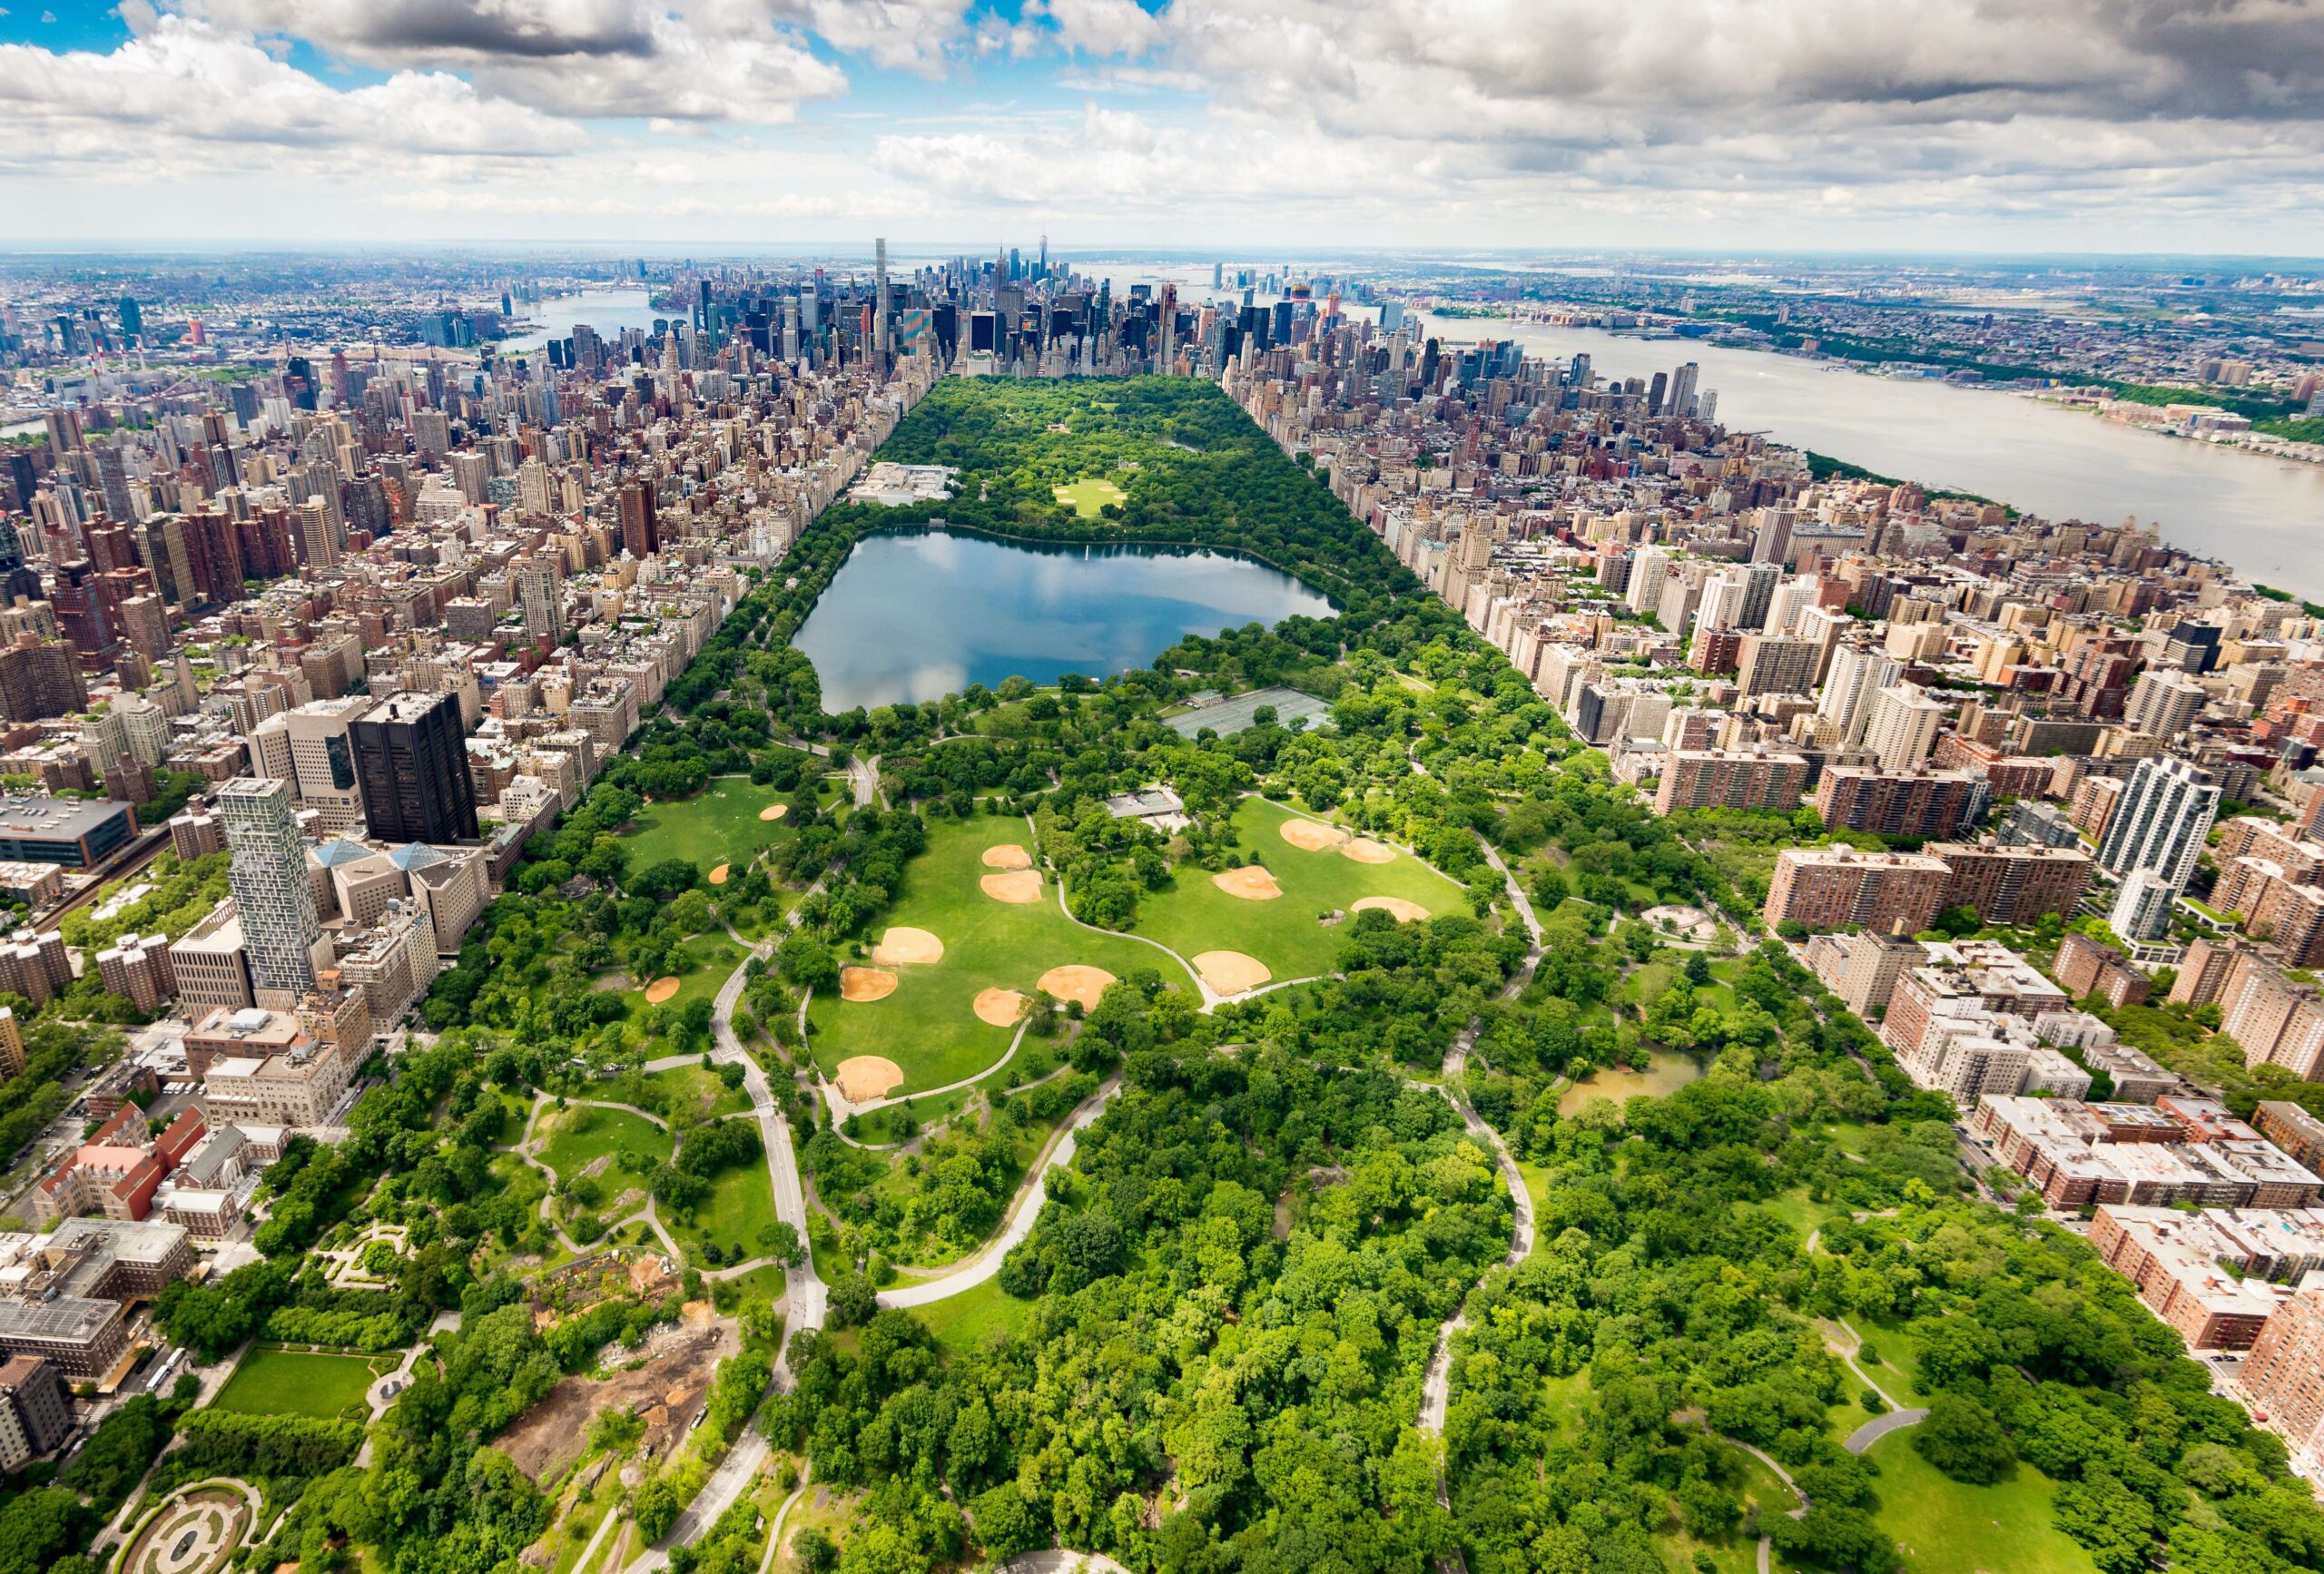 Ariel view of Central Park in NYC